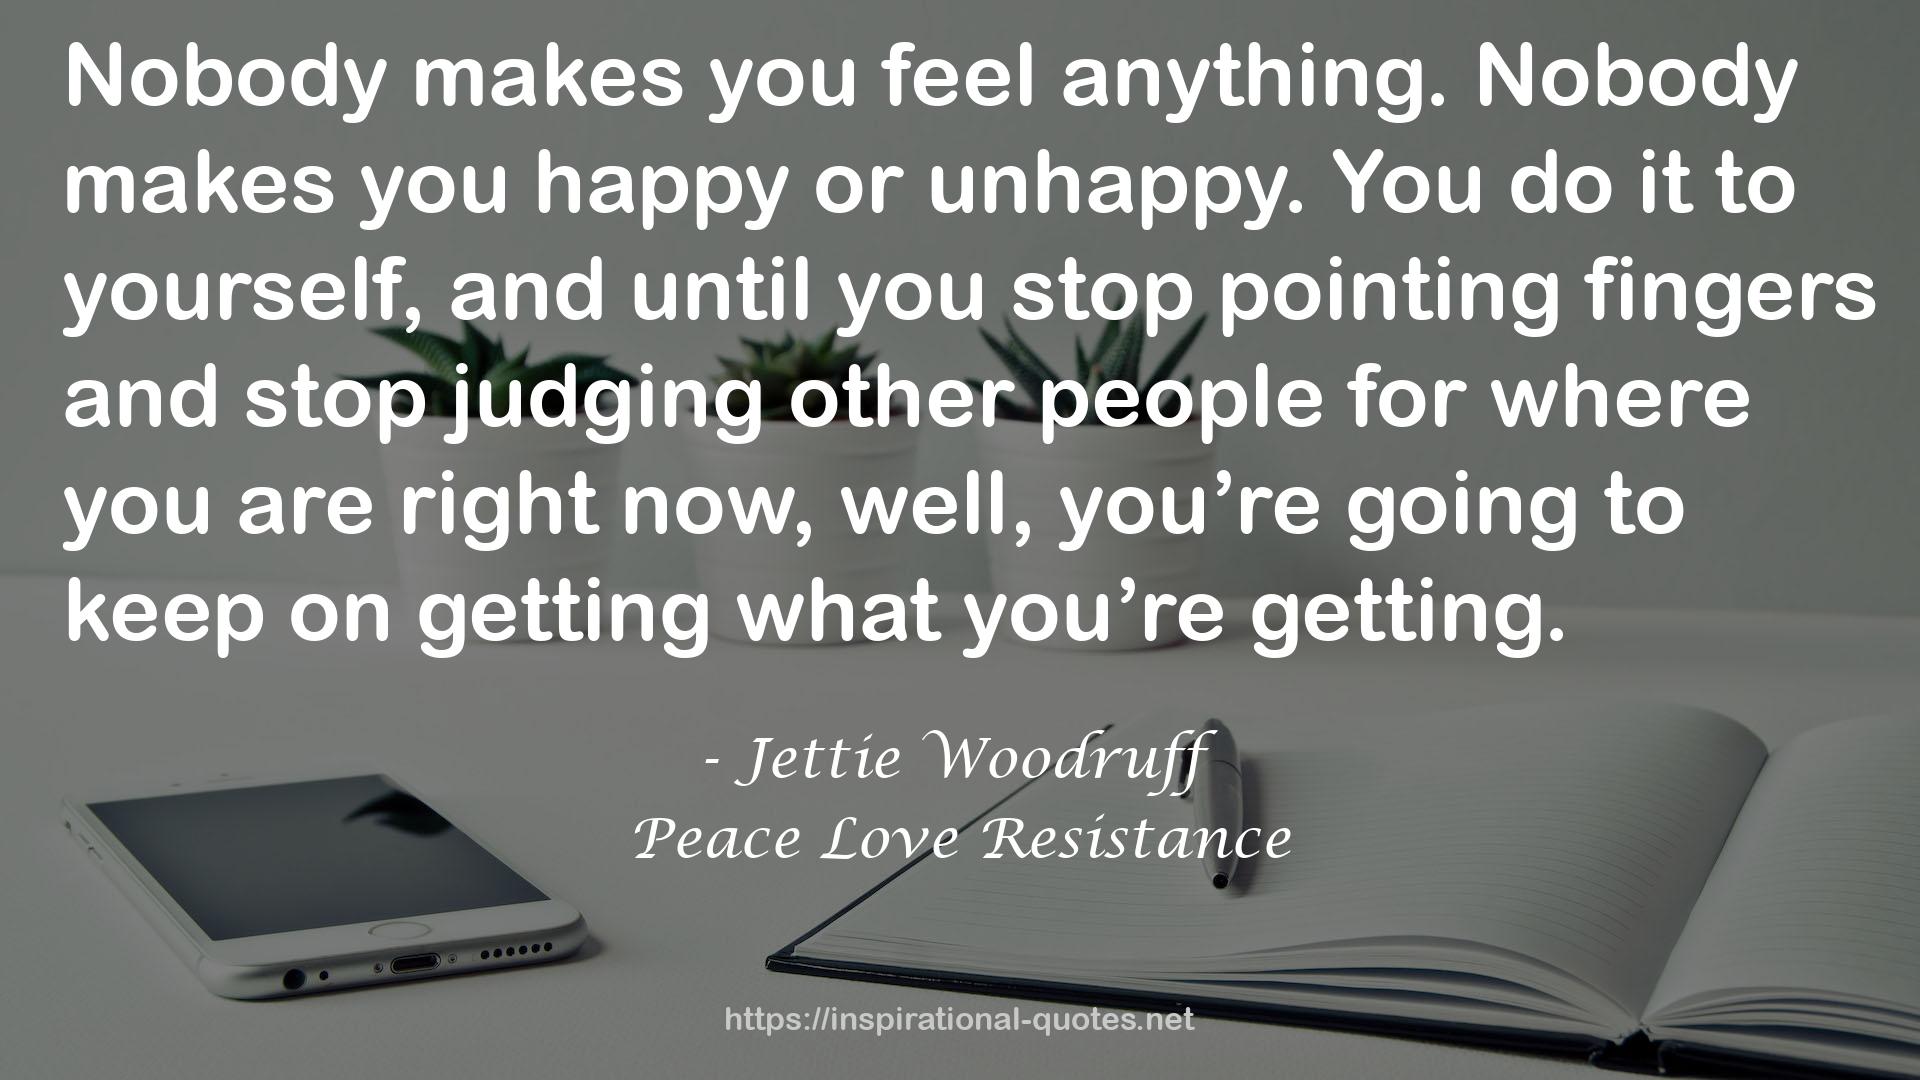 Peace Love Resistance QUOTES